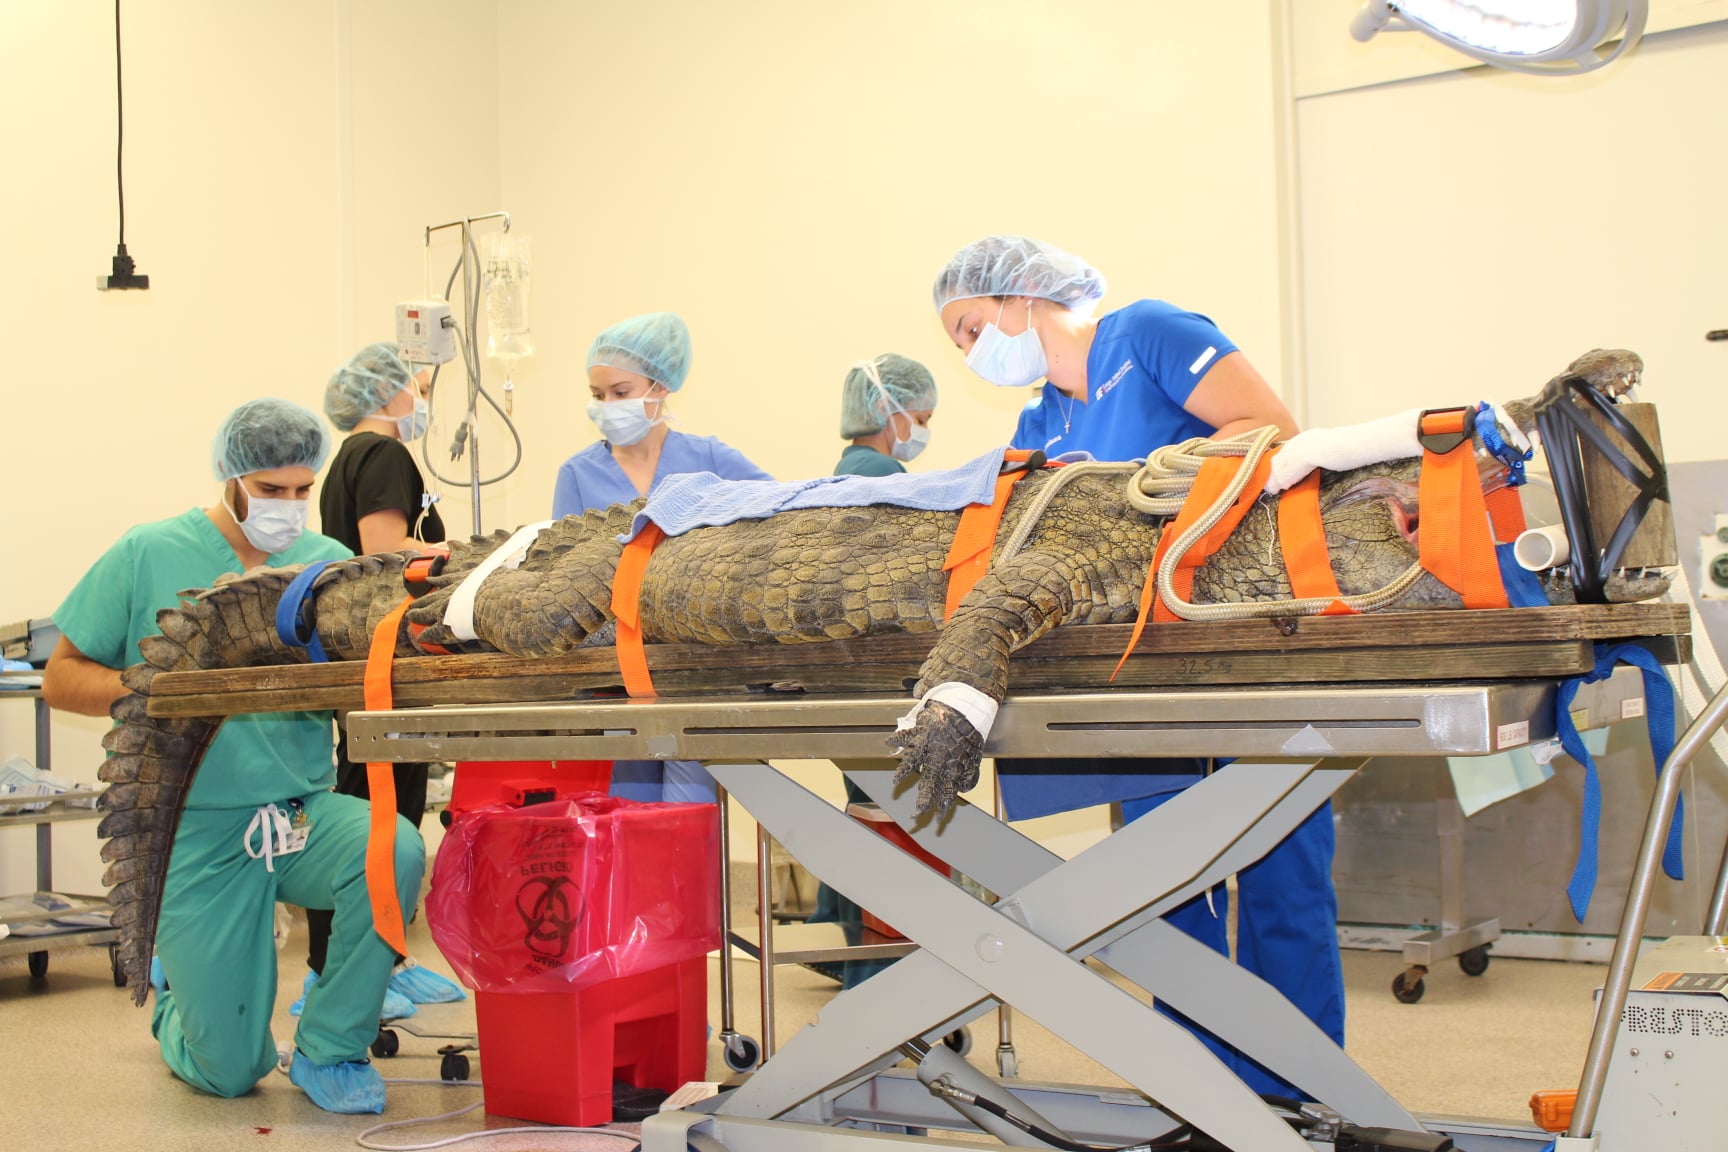 PHOTO: A 10.5-foot-long crocodile weighing almost 350 pounds has undergone successful surgery two months after it ate a tourist’s shoe at the St. Augustine Alligator Farm Zoological Park in St. Augustine, Florida, in December 2020.